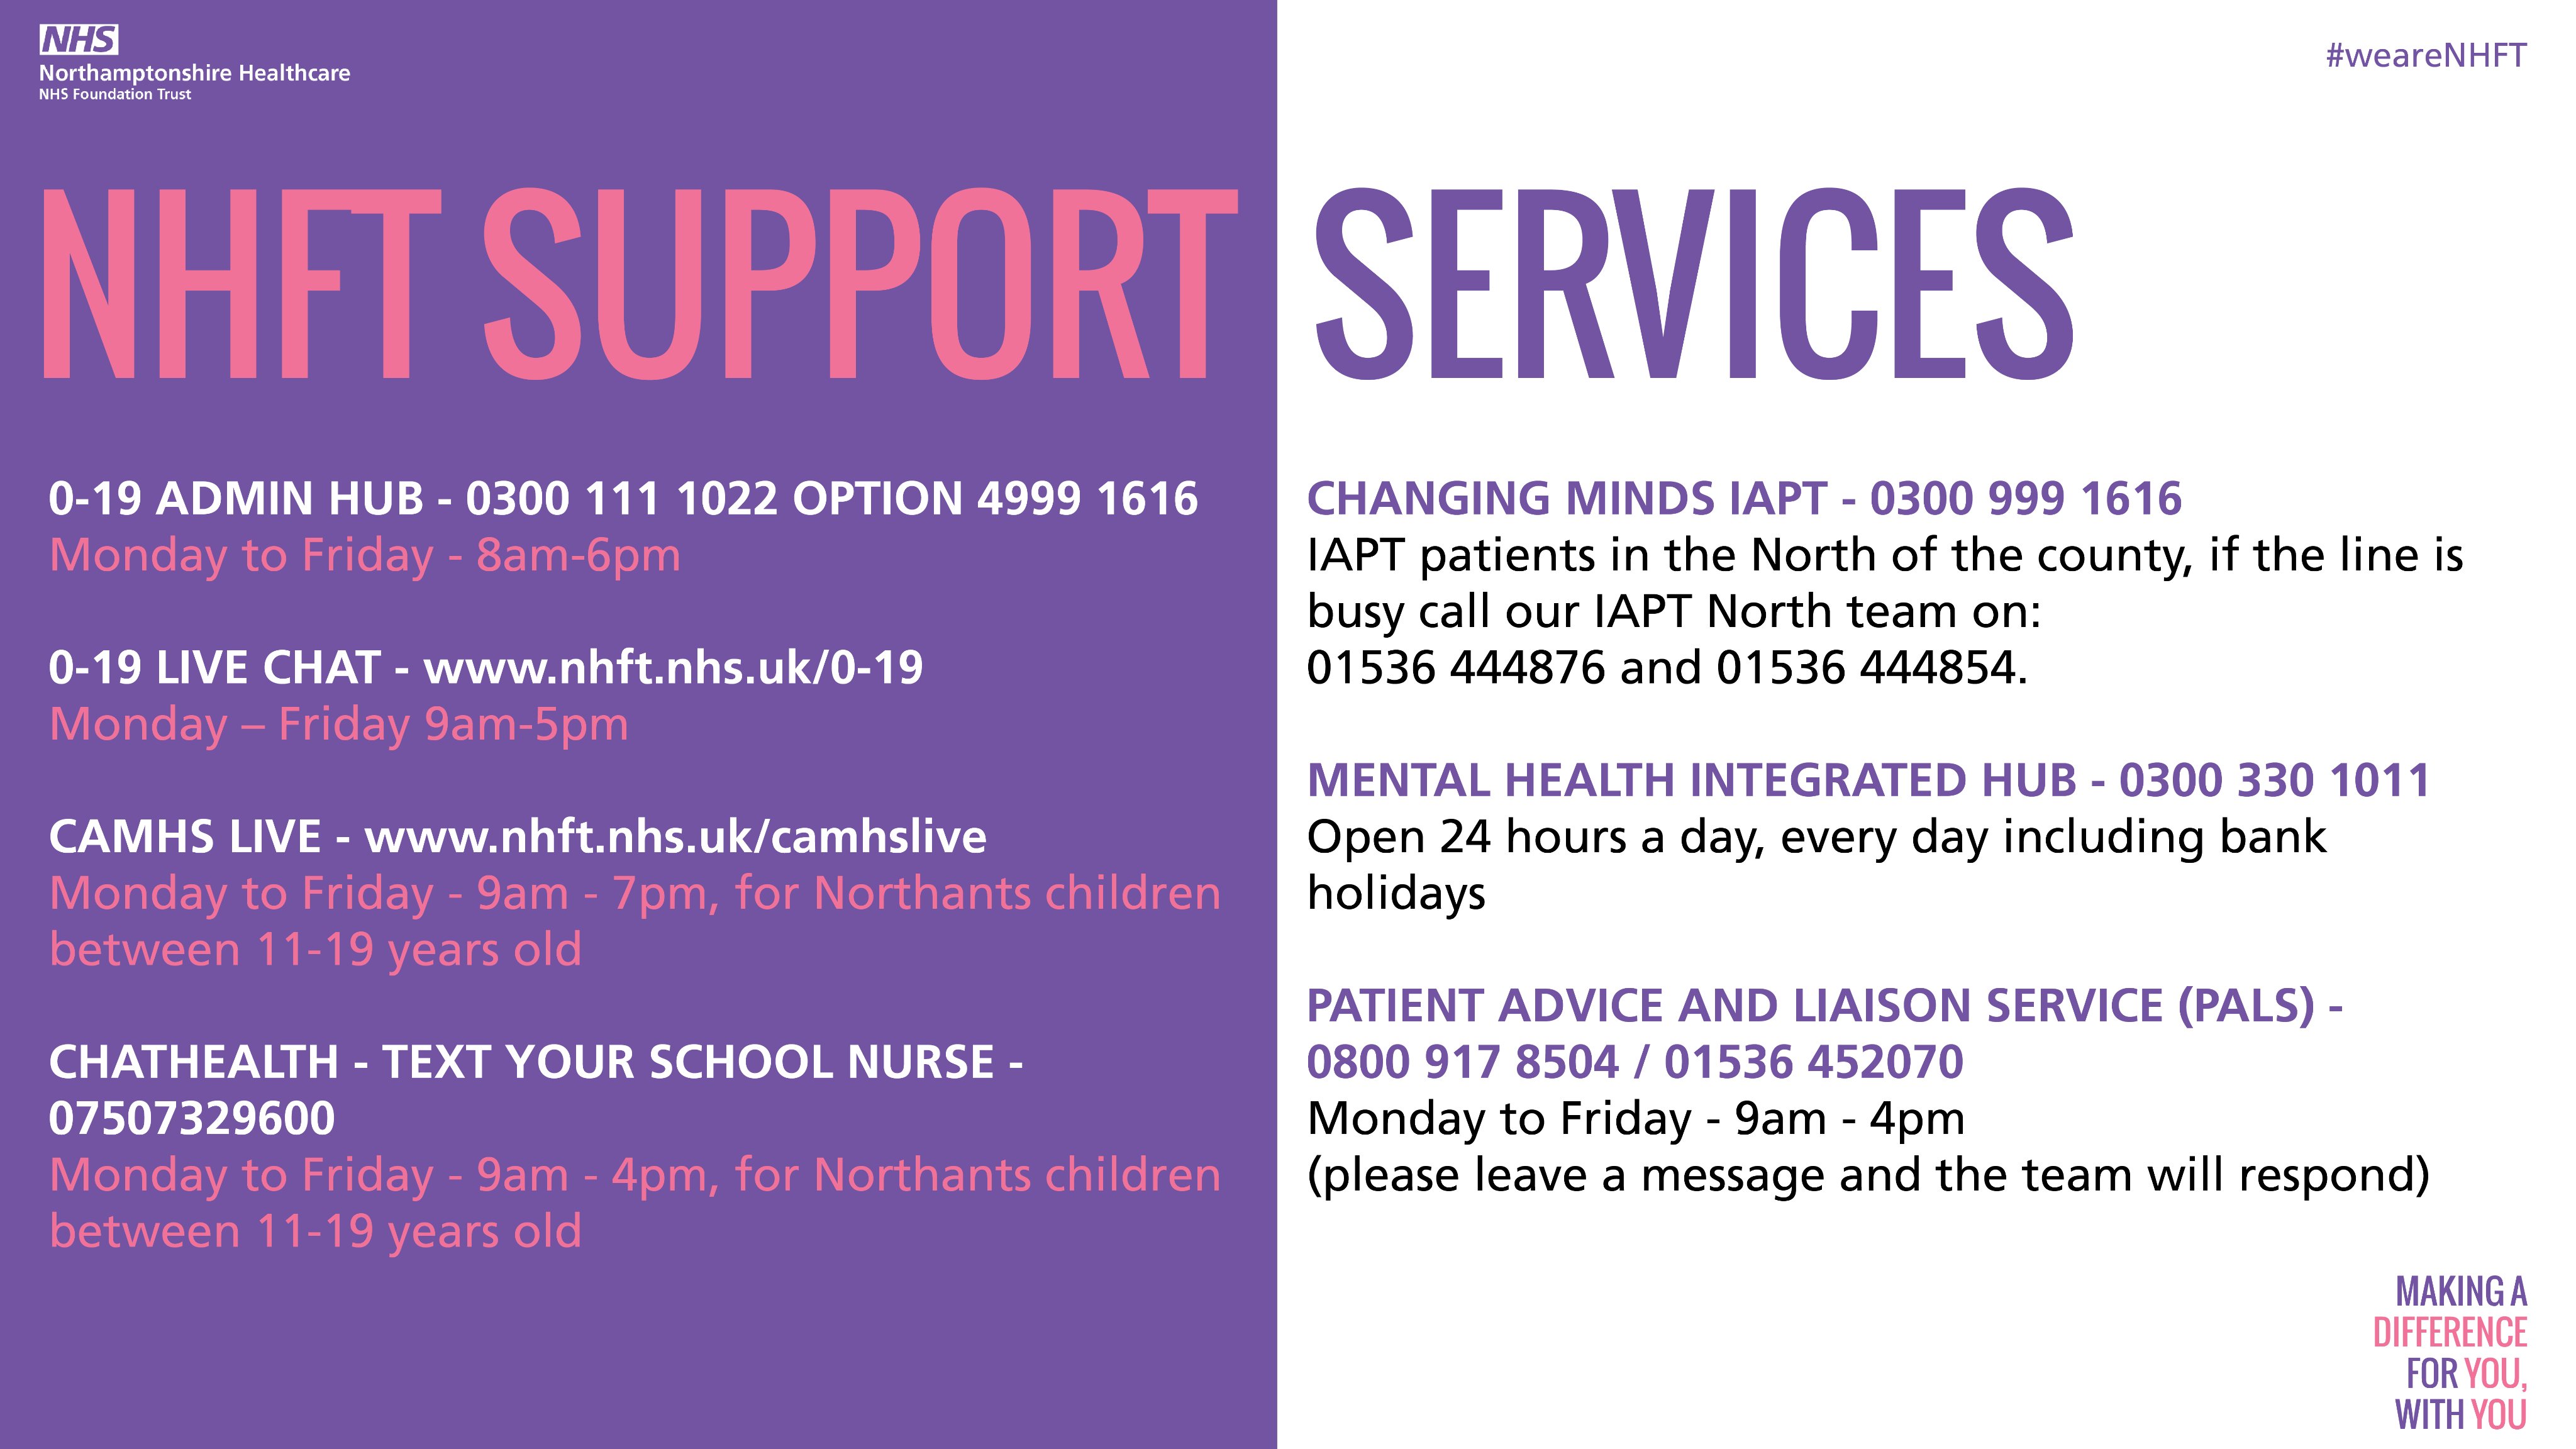 NHFT CYP support services